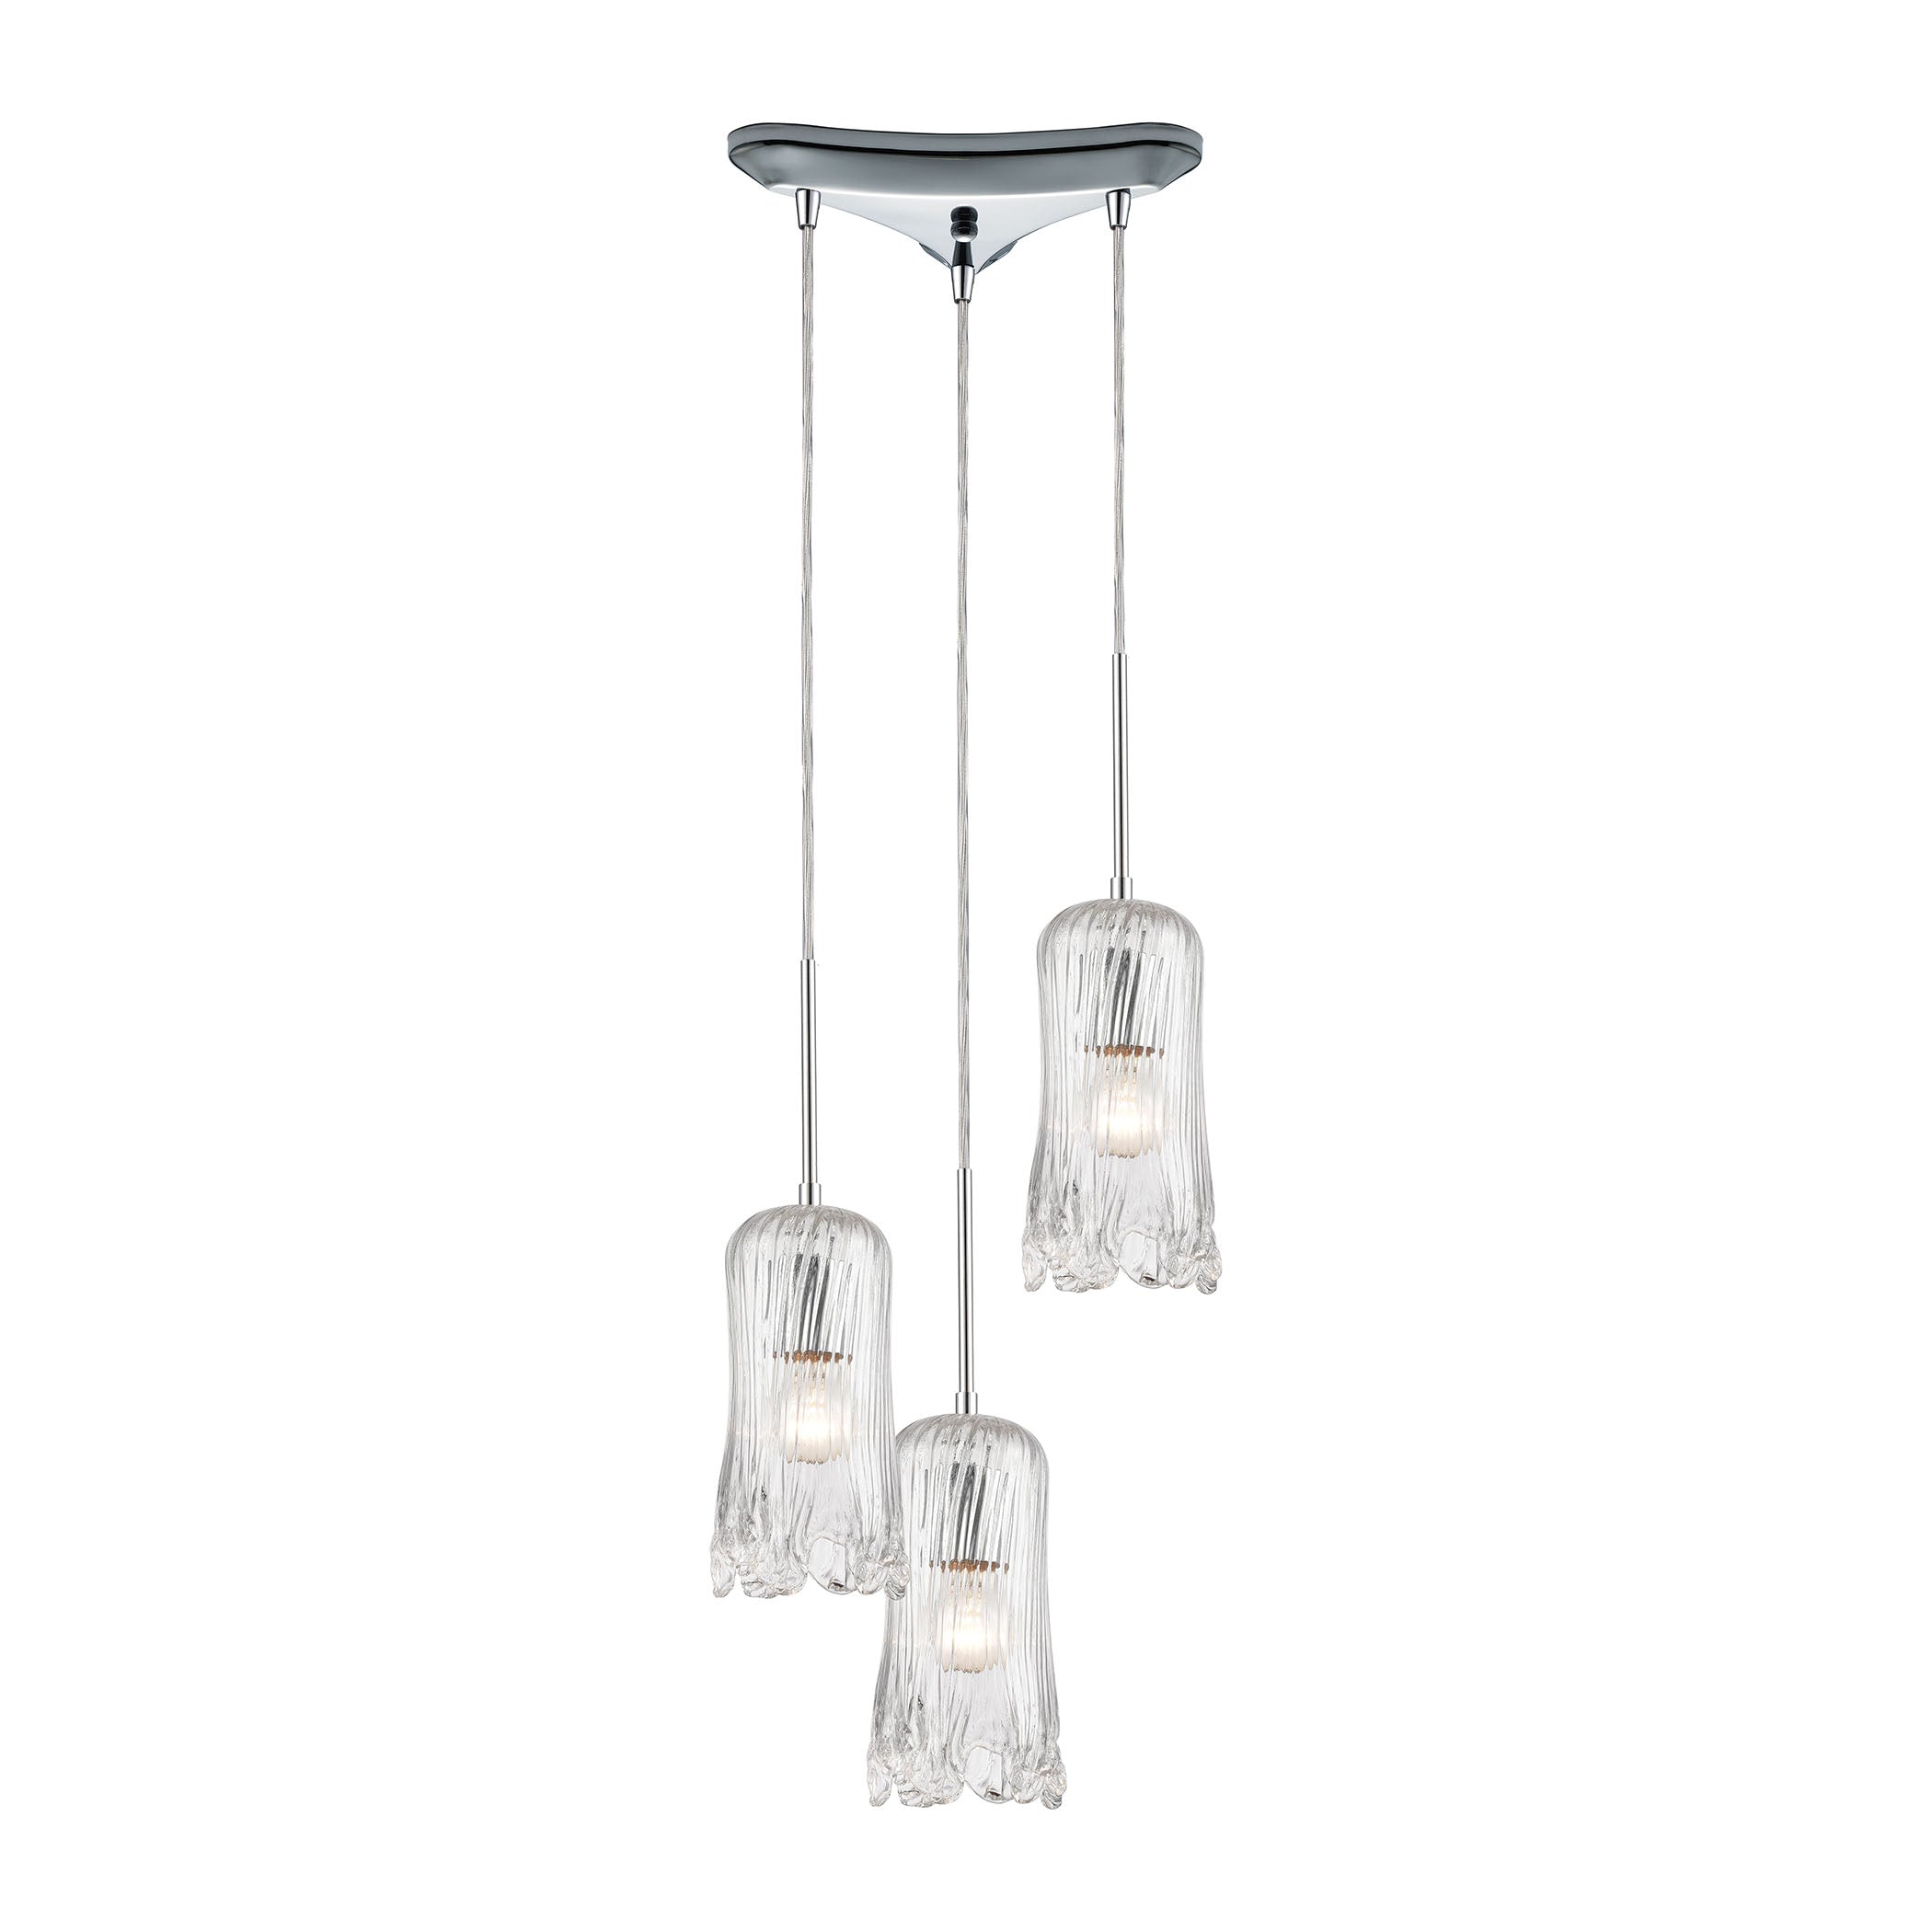 ELK Lighting 21165/3 Hand Formed Glass 3-Light Triangular Mini Pendant Fixture in Chrome with Clear Hand-formed Glass